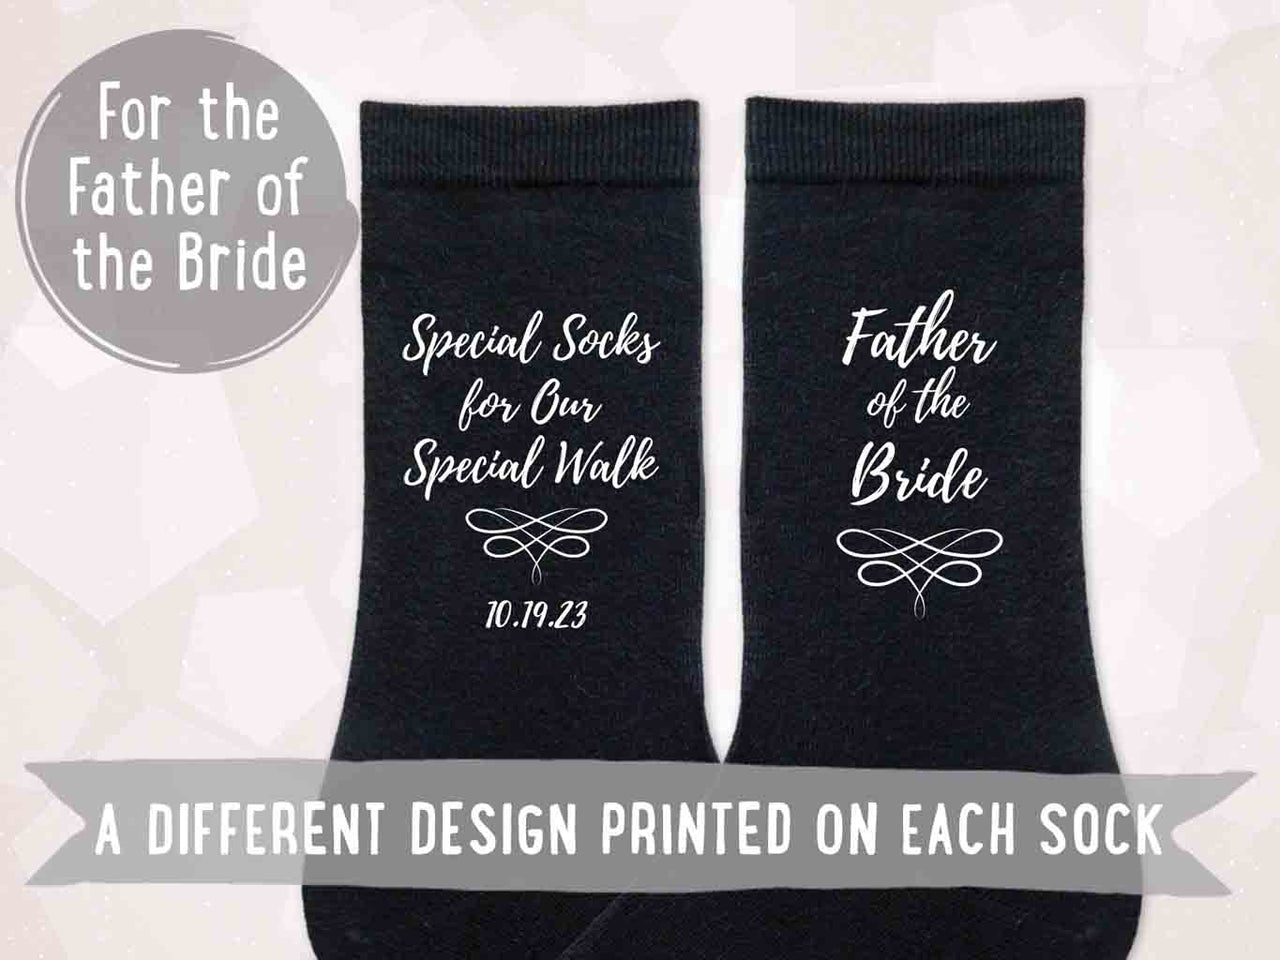 Special socks for a special walk custom printed and personalized with your wedding date.